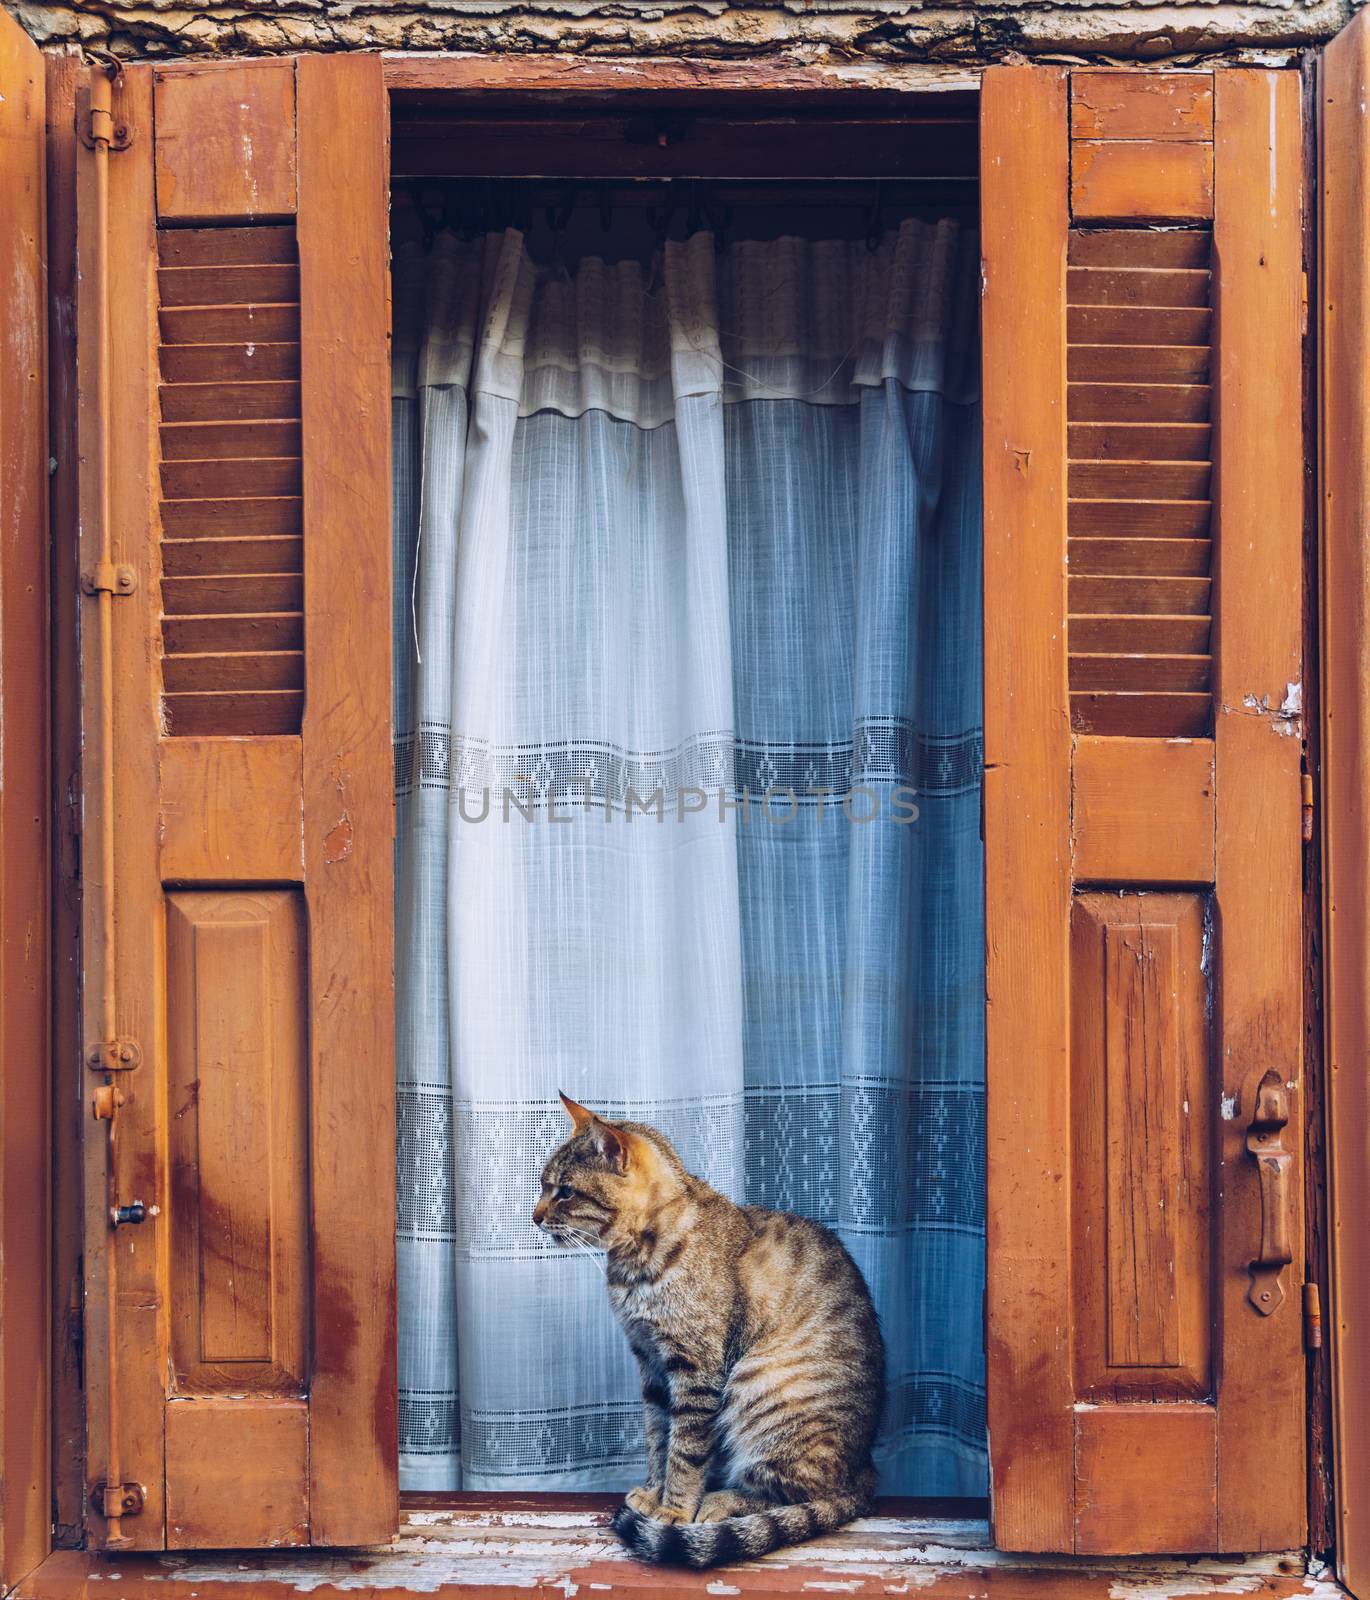 Cat resting on a windowsill in front of a open, aged wooden window with old open blinds painted in a typical Greek orange color. Window of whitewashed house and cat sitting between shutters.